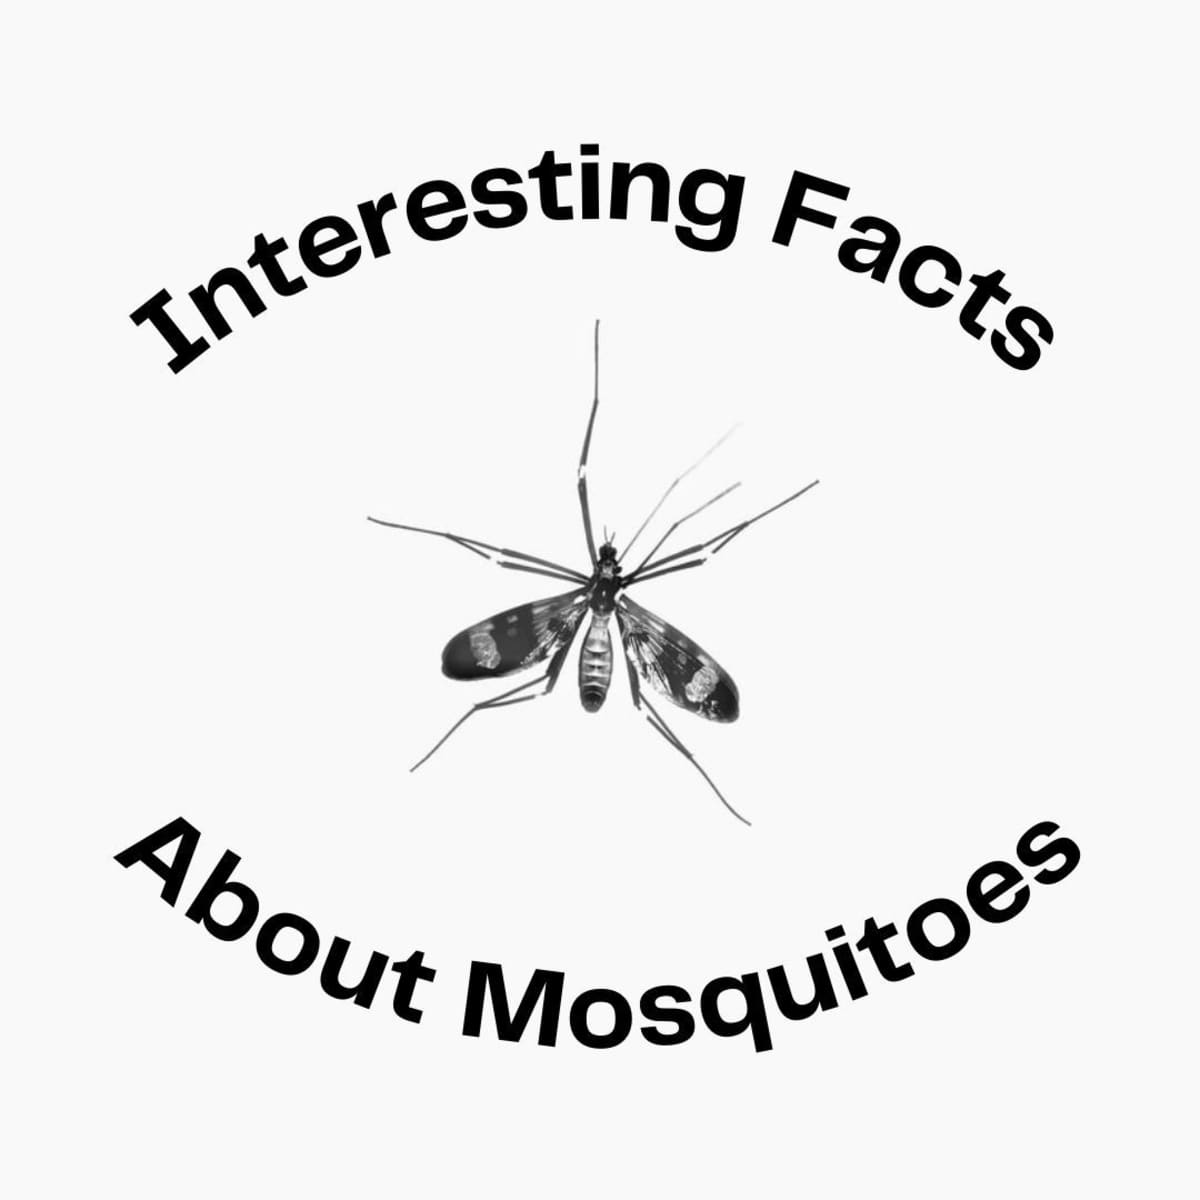 All About Mosquito Facts - Dengarden